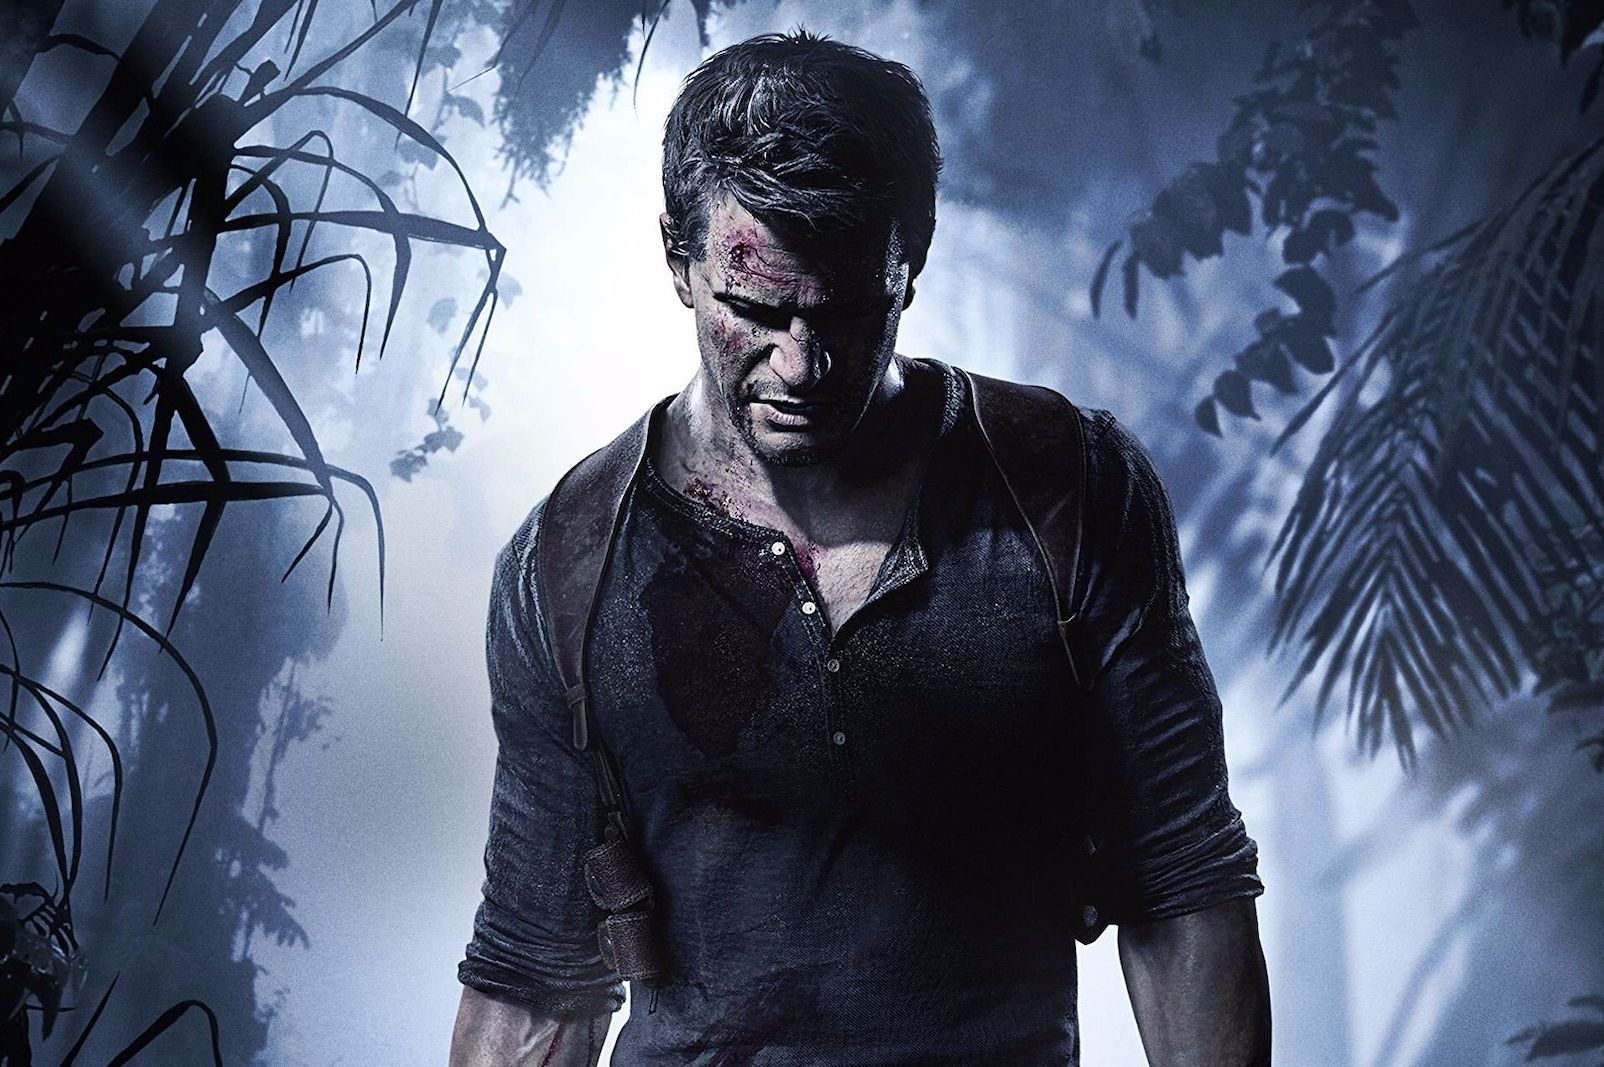 Nathan Drake from Uncharted walking through a jungle